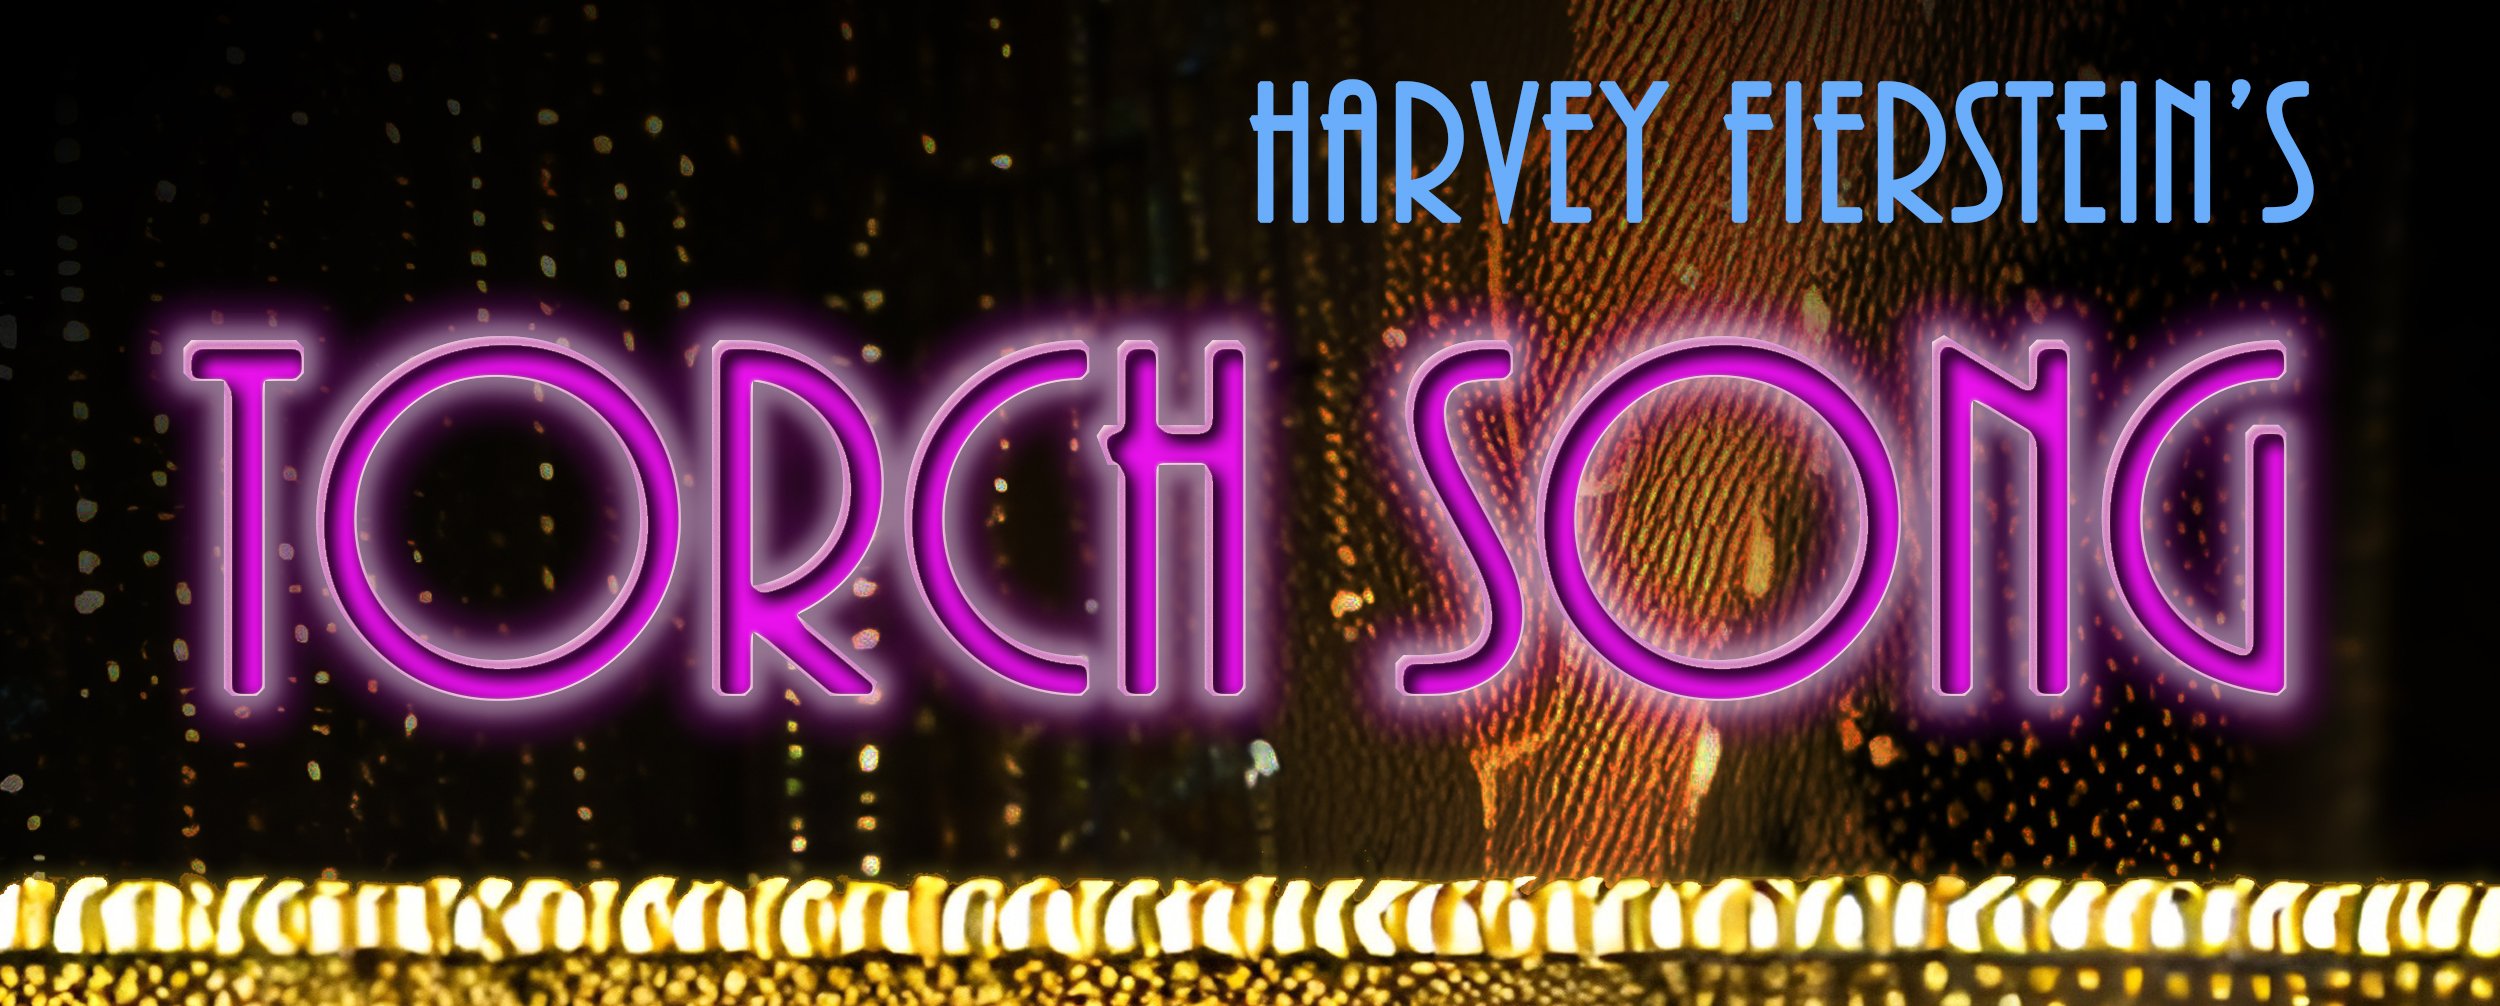 A gold glitter curtain. Overlay text reads “Harvey Fierstein’s Torch Song” in bright pink letters.